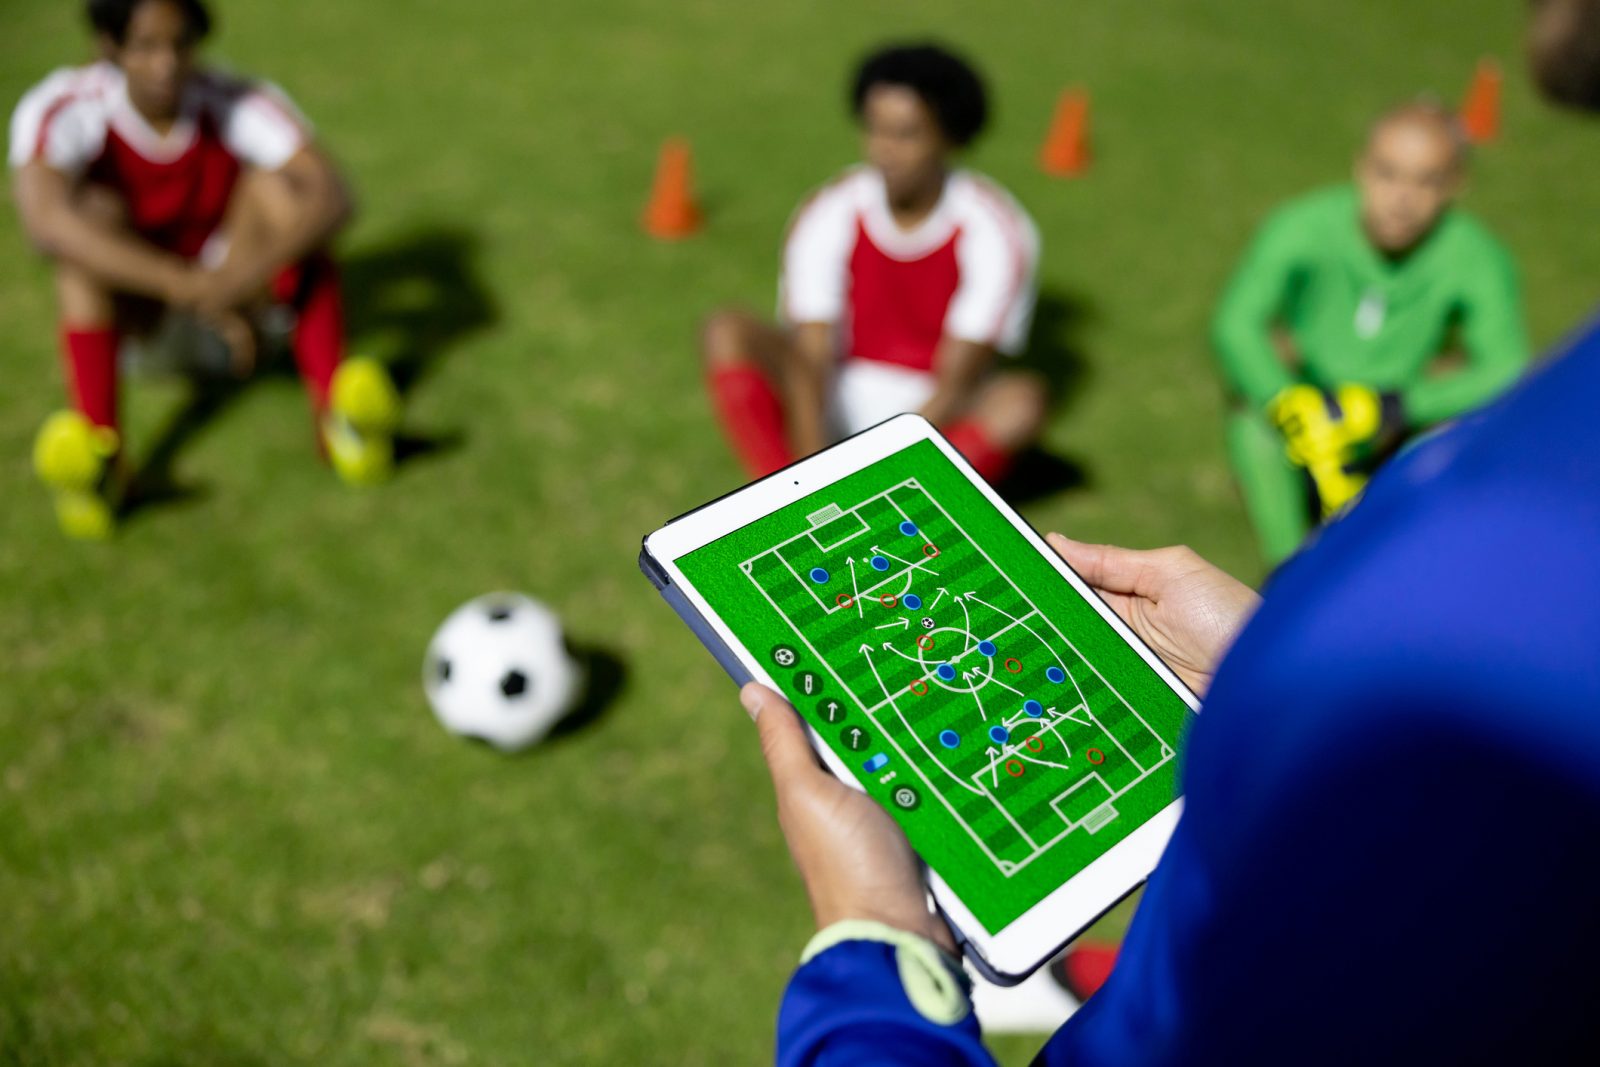 A tablet in the foreground being held by two hands shows a soccer field with arrows, lines and dots, with three soccer players on a green field are sitting with a soccer ball in a blurred background.